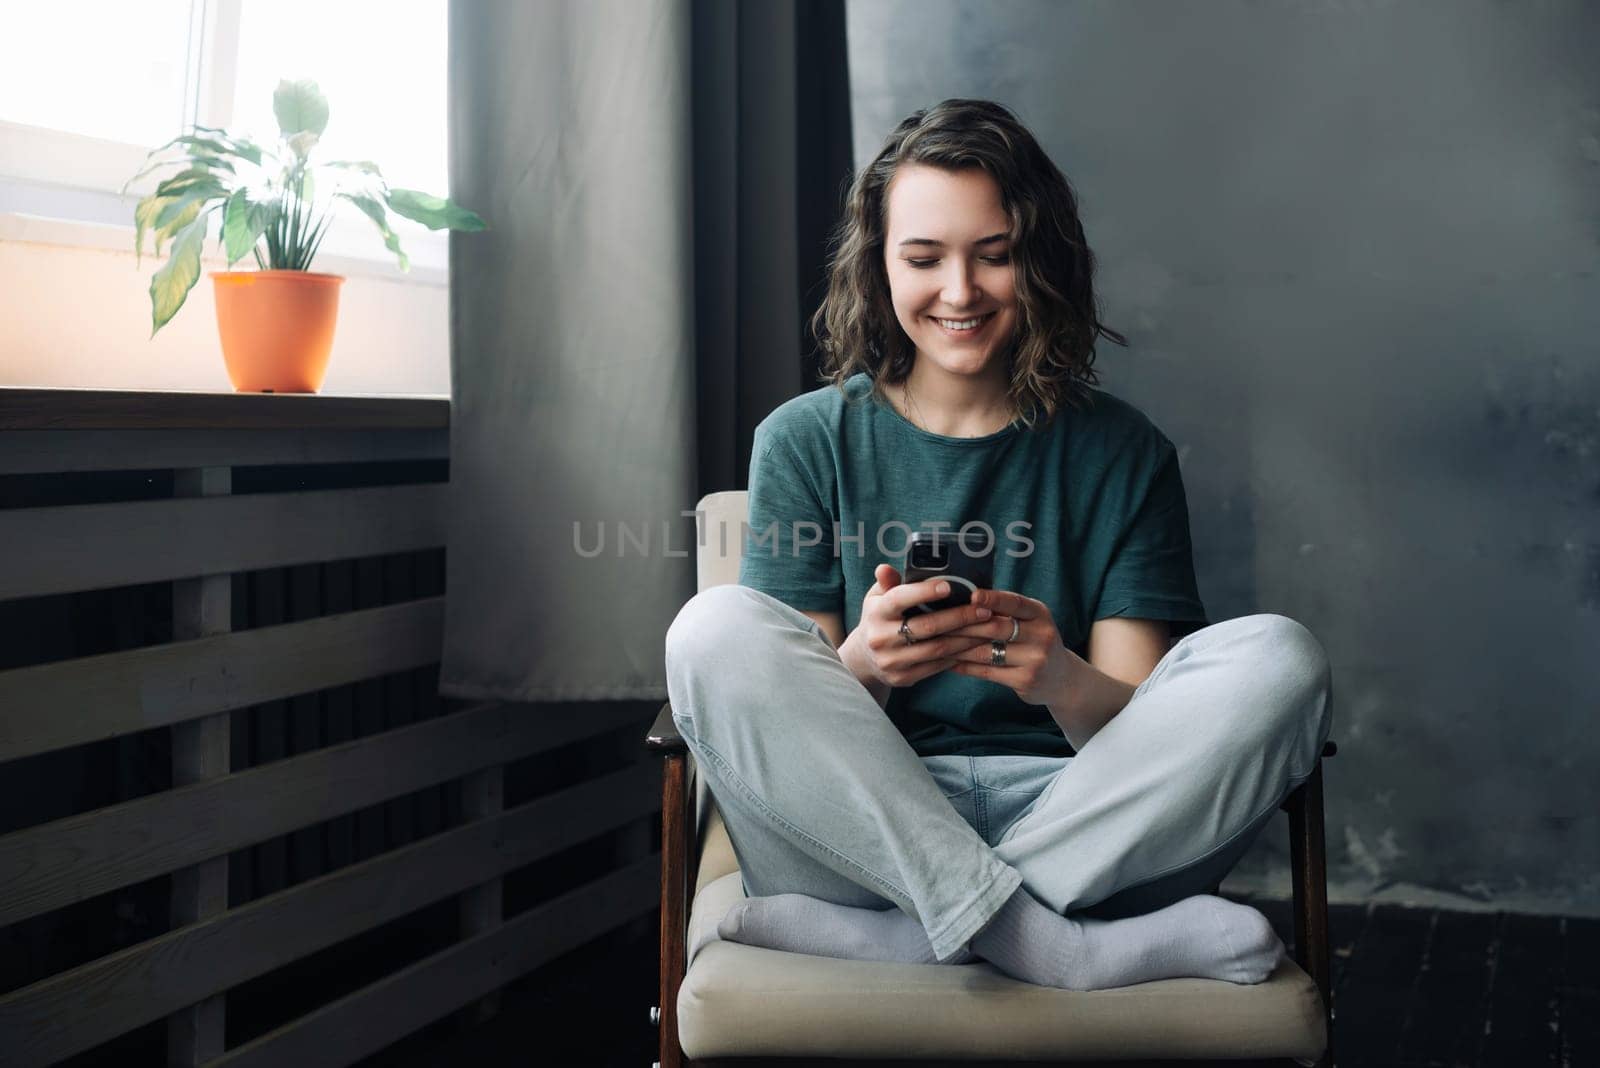 Digital Lifestyle: Young Woman Engages in Communication and Productivity Through Smartphone in the Comfort of Home. A Blend of Study, Work, and Connection in the Digital Age by ViShark